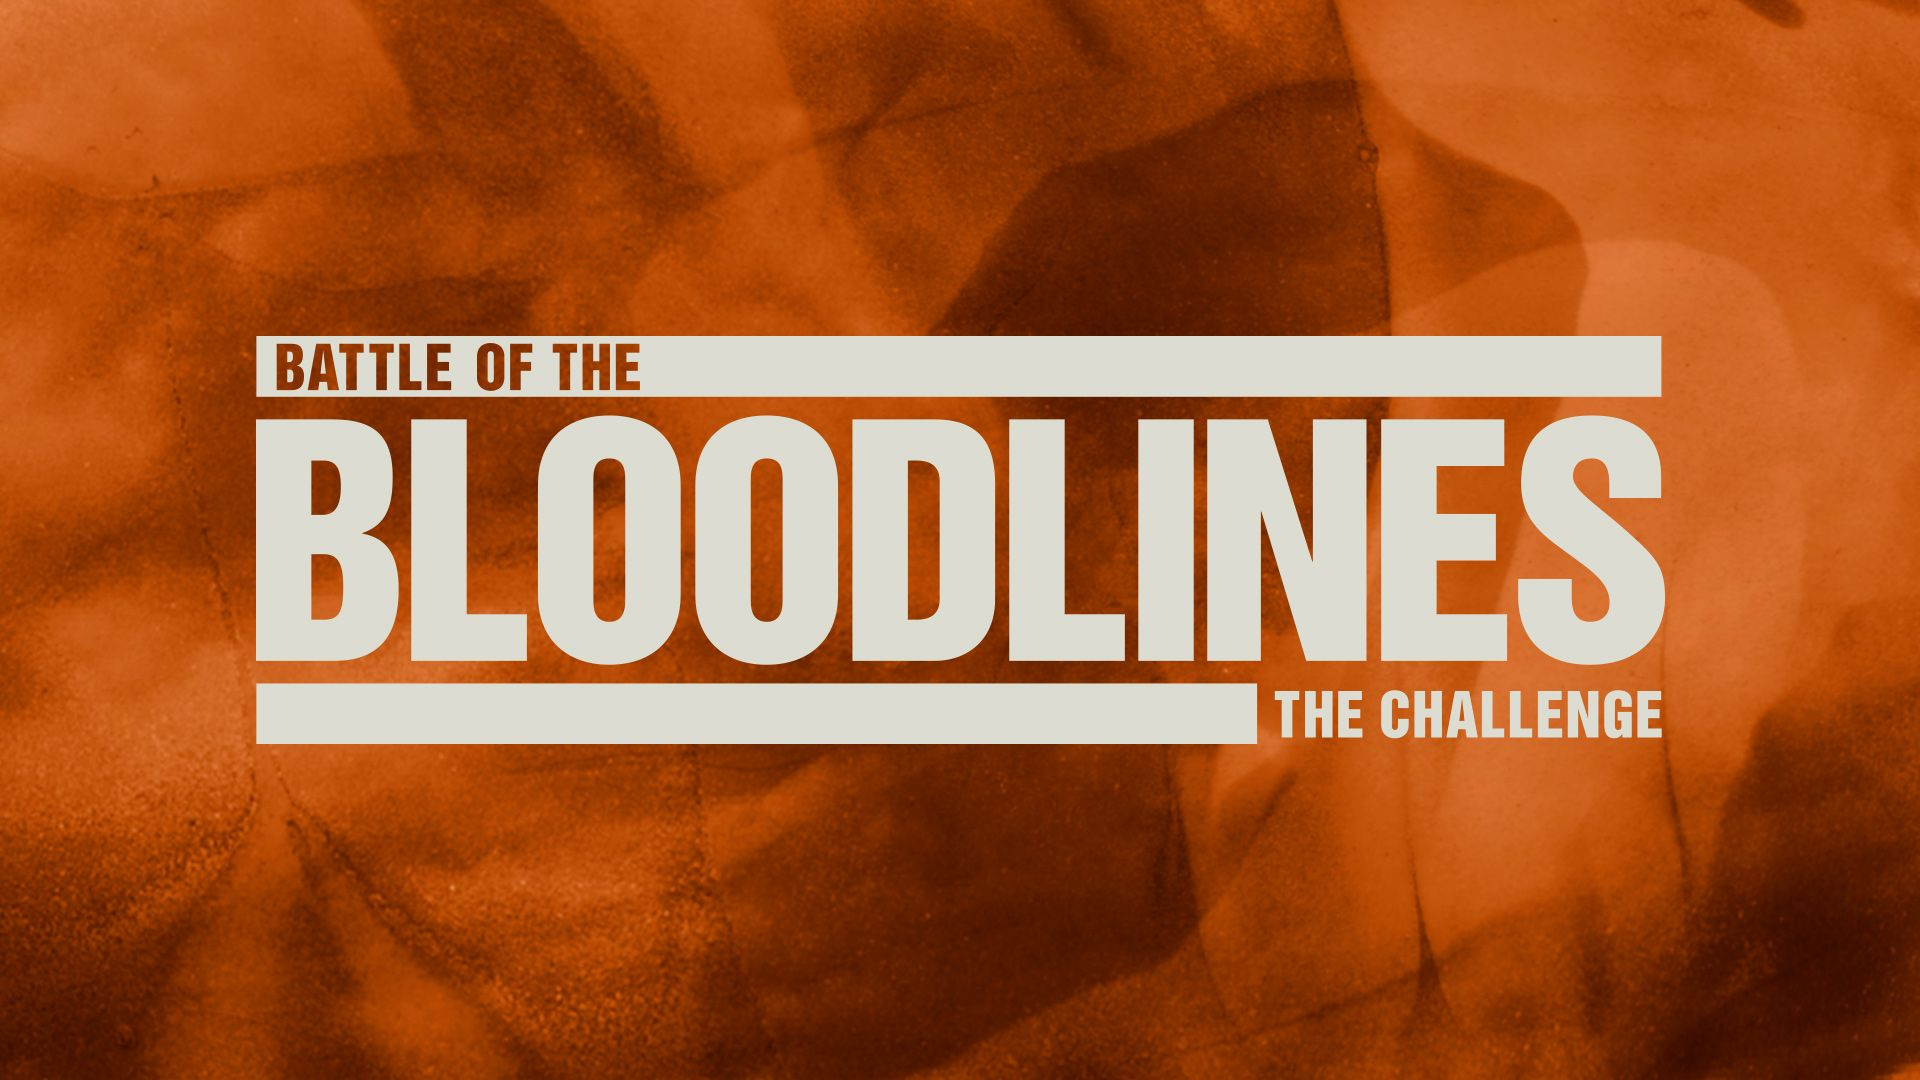 the challenge battle of the bloodlines episode 1